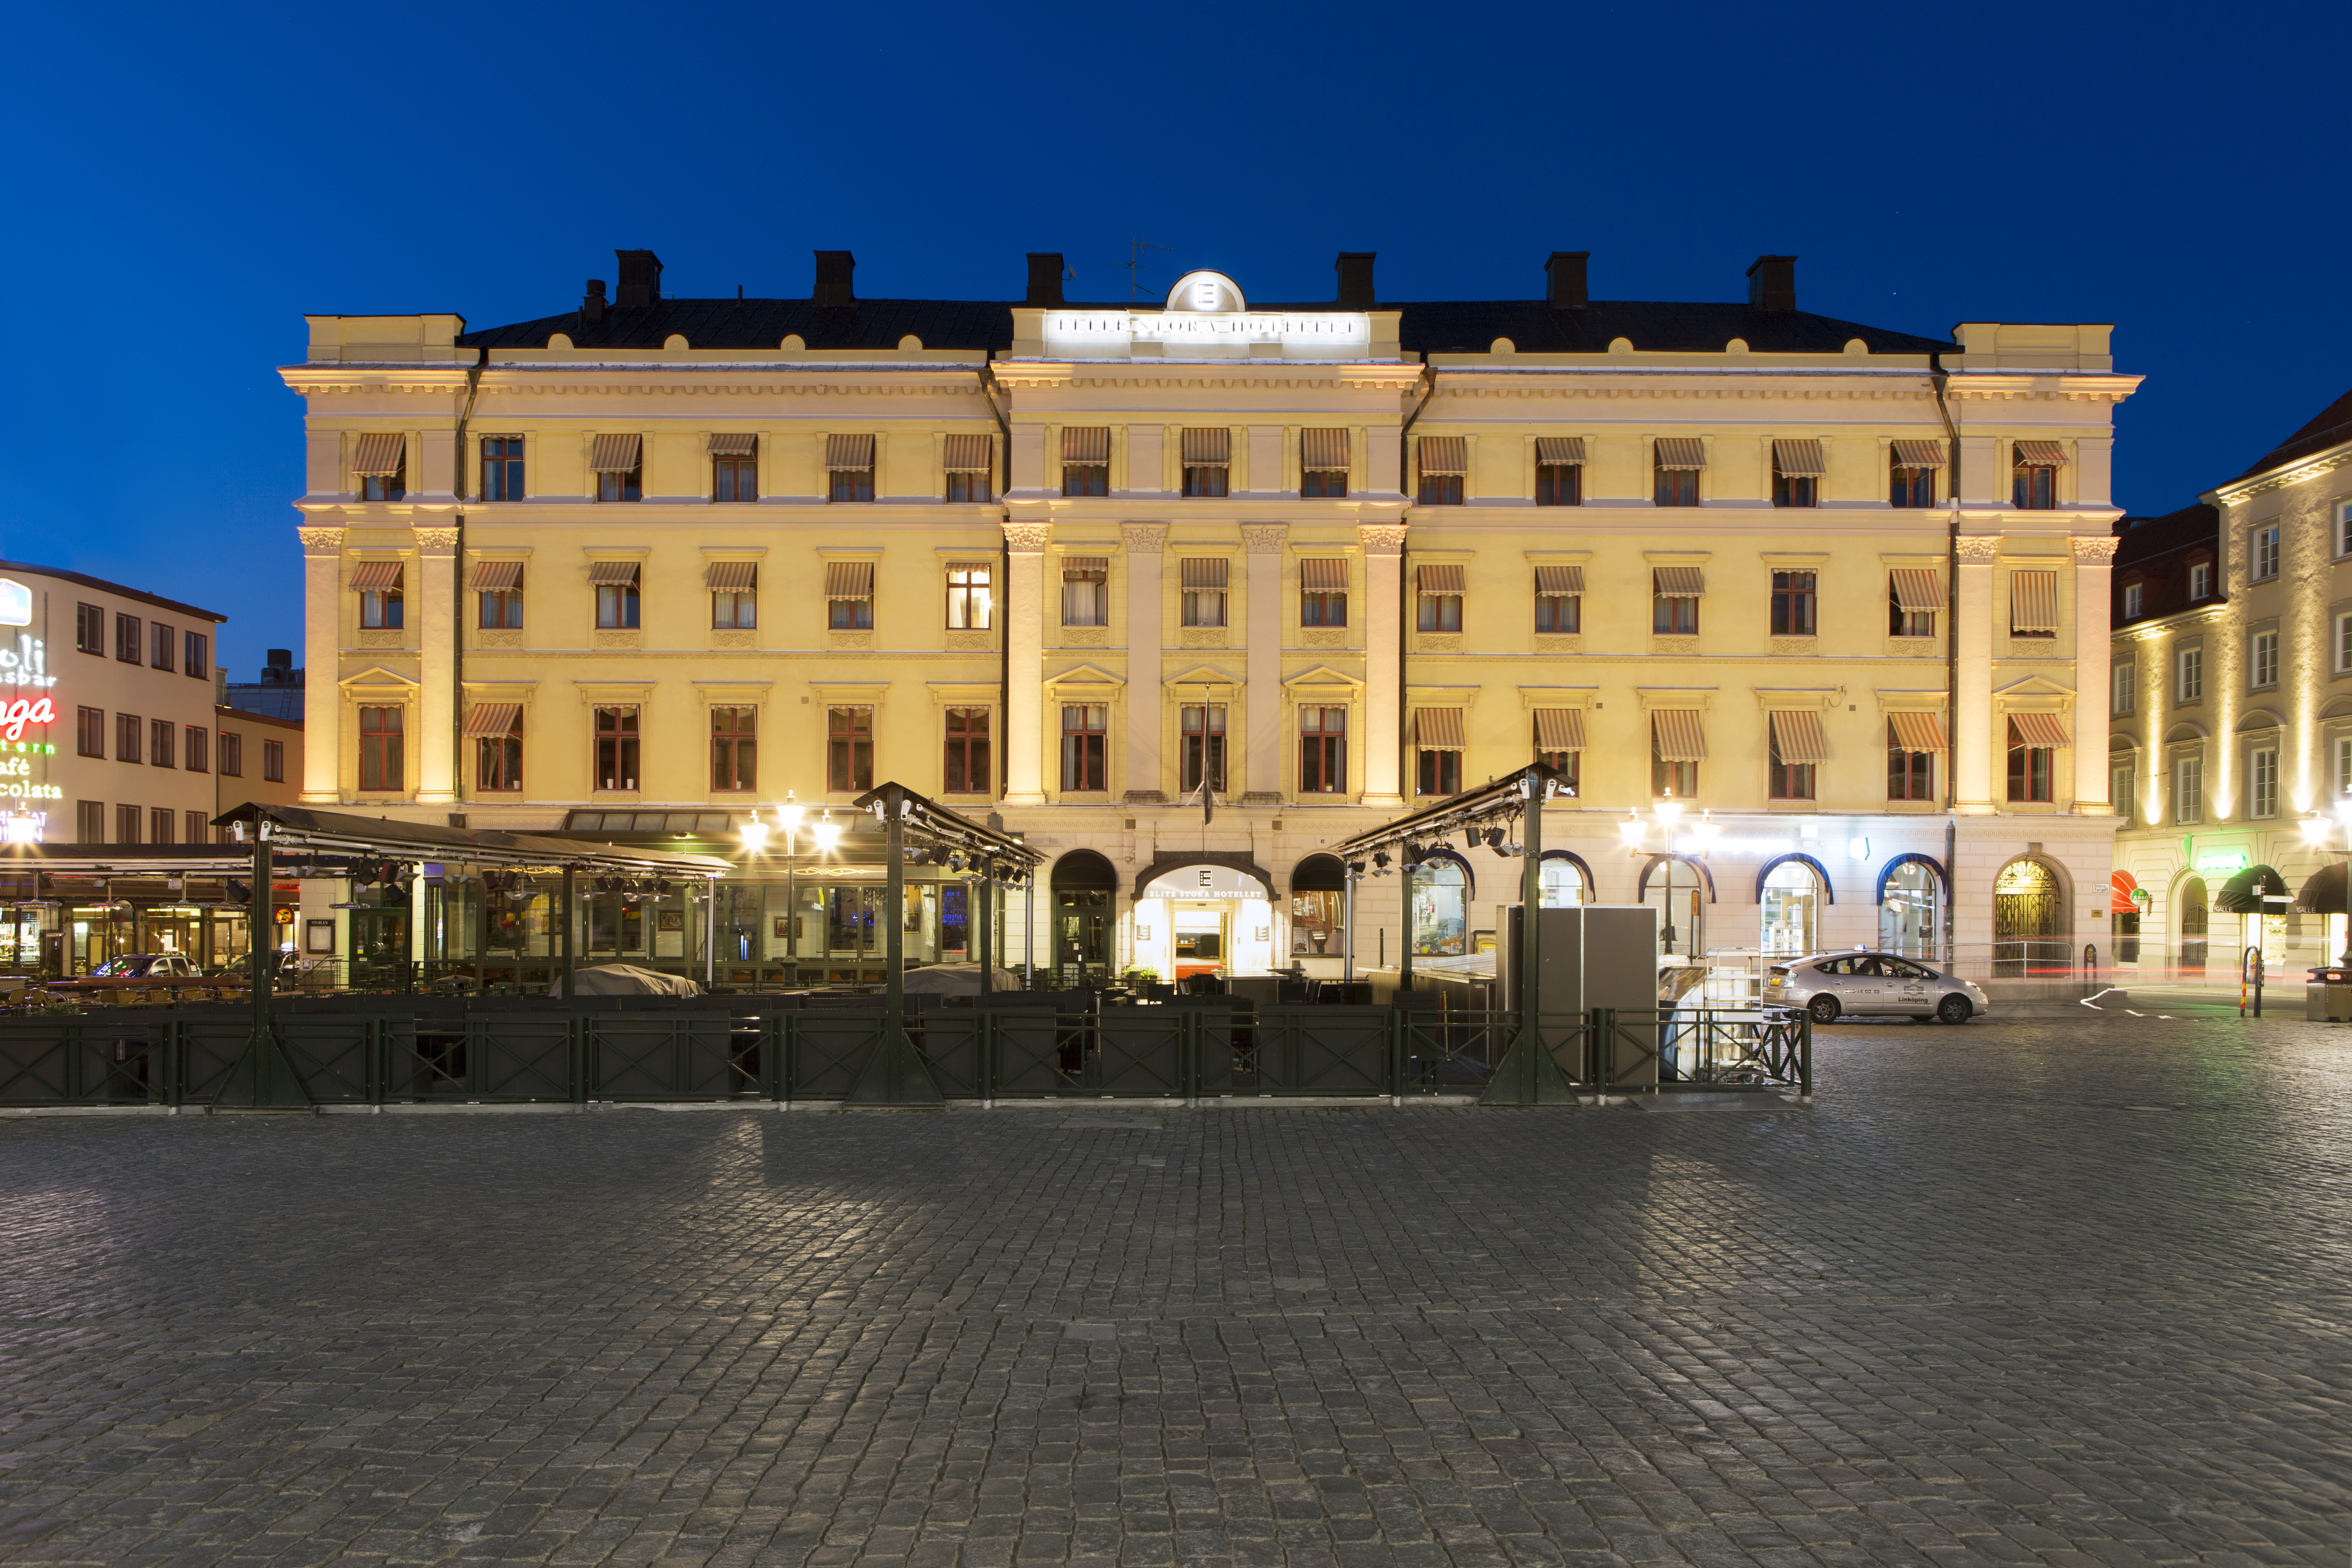 The grand facade of the Elite Stora Hotellet at dusk